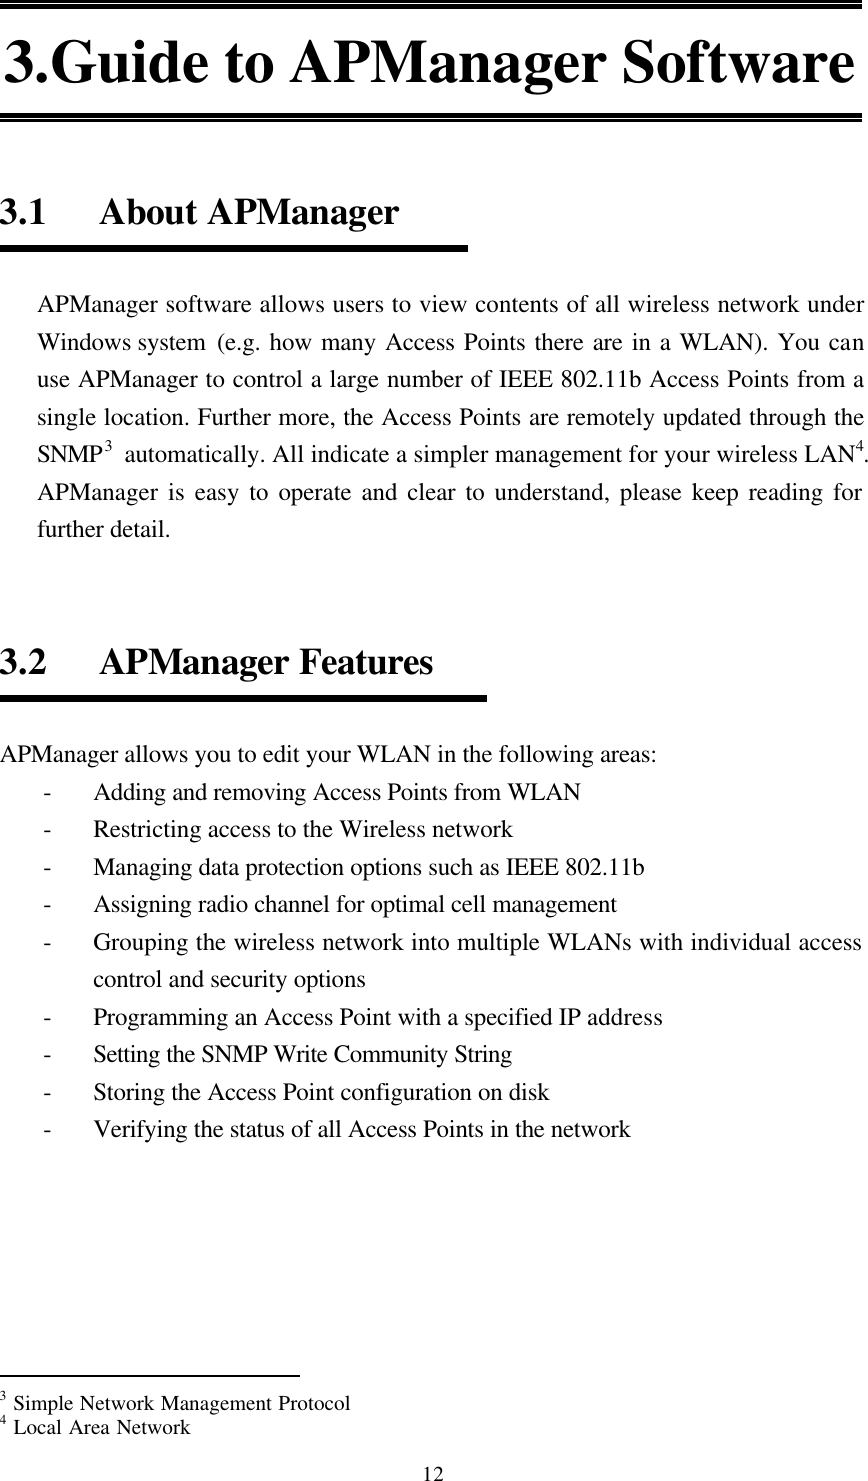  12 3.Guide to APManager Software   3.1   About APManager  APManager software allows users to view contents of all wireless network under Windows system  (e.g. how many Access Points there are in a WLAN). You can use APManager to control a large number of IEEE 802.11b Access Points from a single location. Further more, the Access Points are remotely updated through the SNMP3 automatically. All indicate a simpler management for your wireless LAN4. APManager is easy to operate and clear to understand, please keep reading for further detail.   3.2   APManager Features  APManager allows you to edit your WLAN in the following areas: - Adding and removing Access Points from WLAN - Restricting access to the Wireless network - Managing data protection options such as IEEE 802.11b - Assigning radio channel for optimal cell management - Grouping the wireless network into multiple WLANs with individual access control and security options - Programming an Access Point with a specified IP address - Setting the SNMP Write Community String - Storing the Access Point configuration on disk - Verifying the status of all Access Points in the network                                                  3 Simple Network Management Protocol 4 Local Area Network 